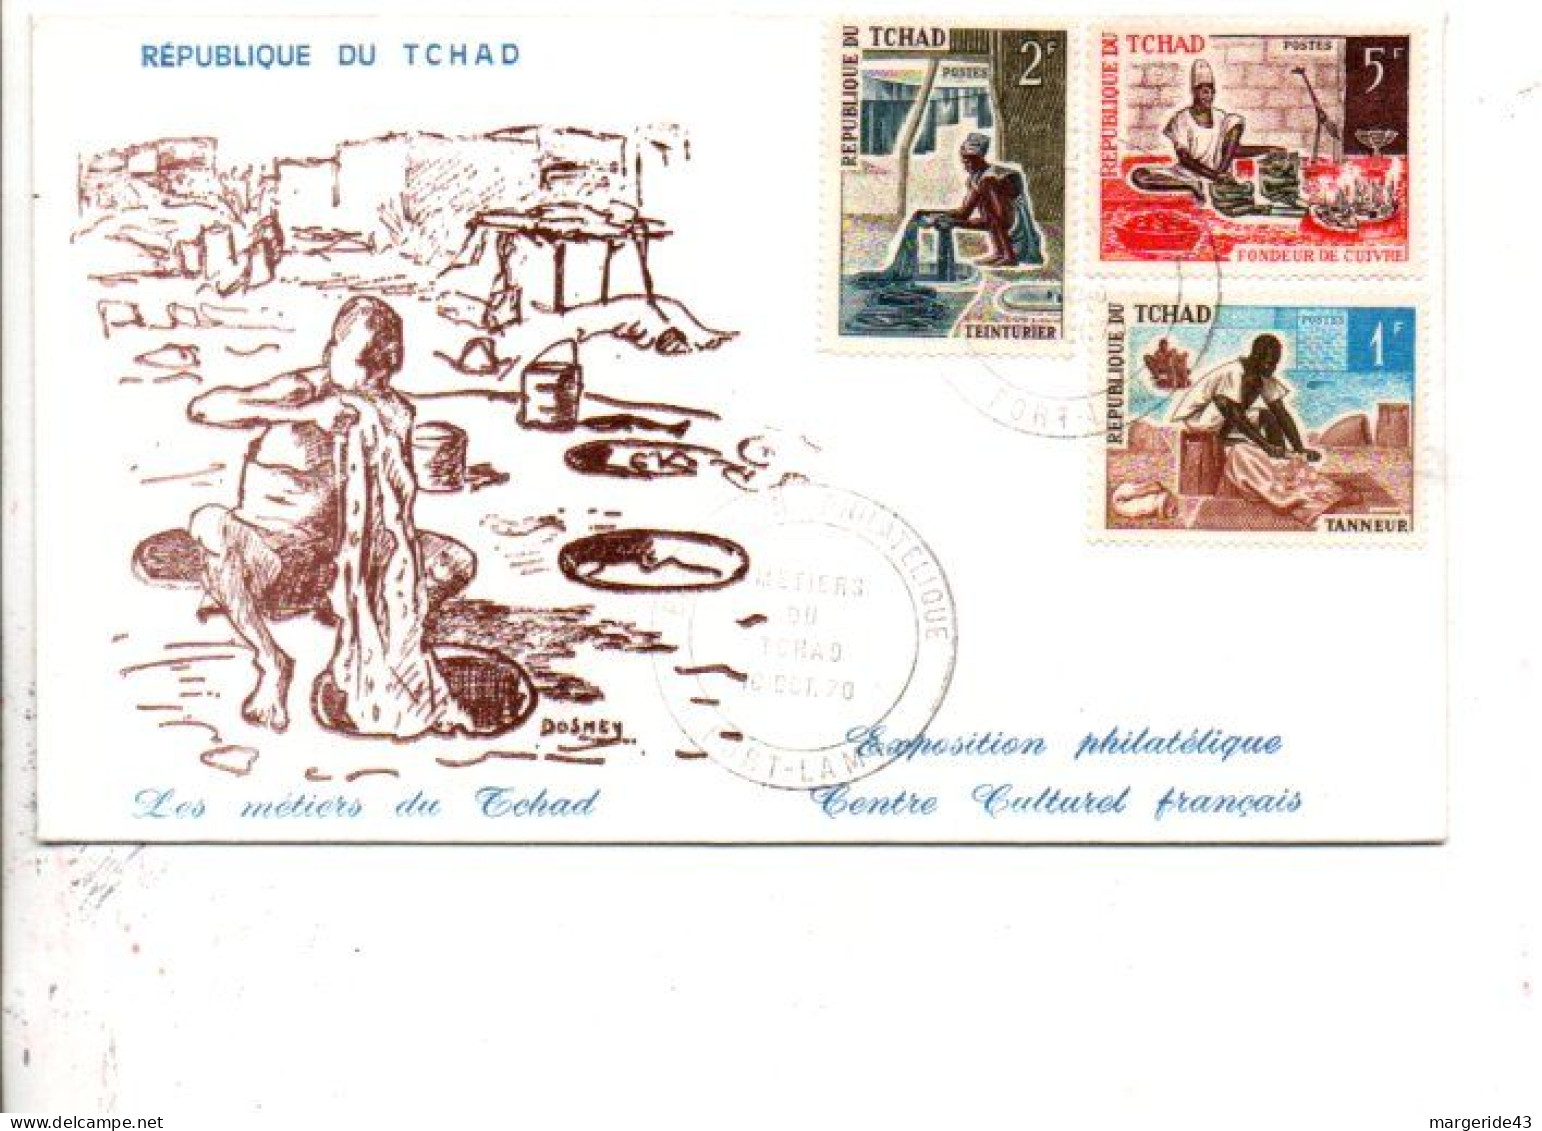 TCHAD FDC 1970 LES METIERS DU RCHAD - Chad (1960-...)